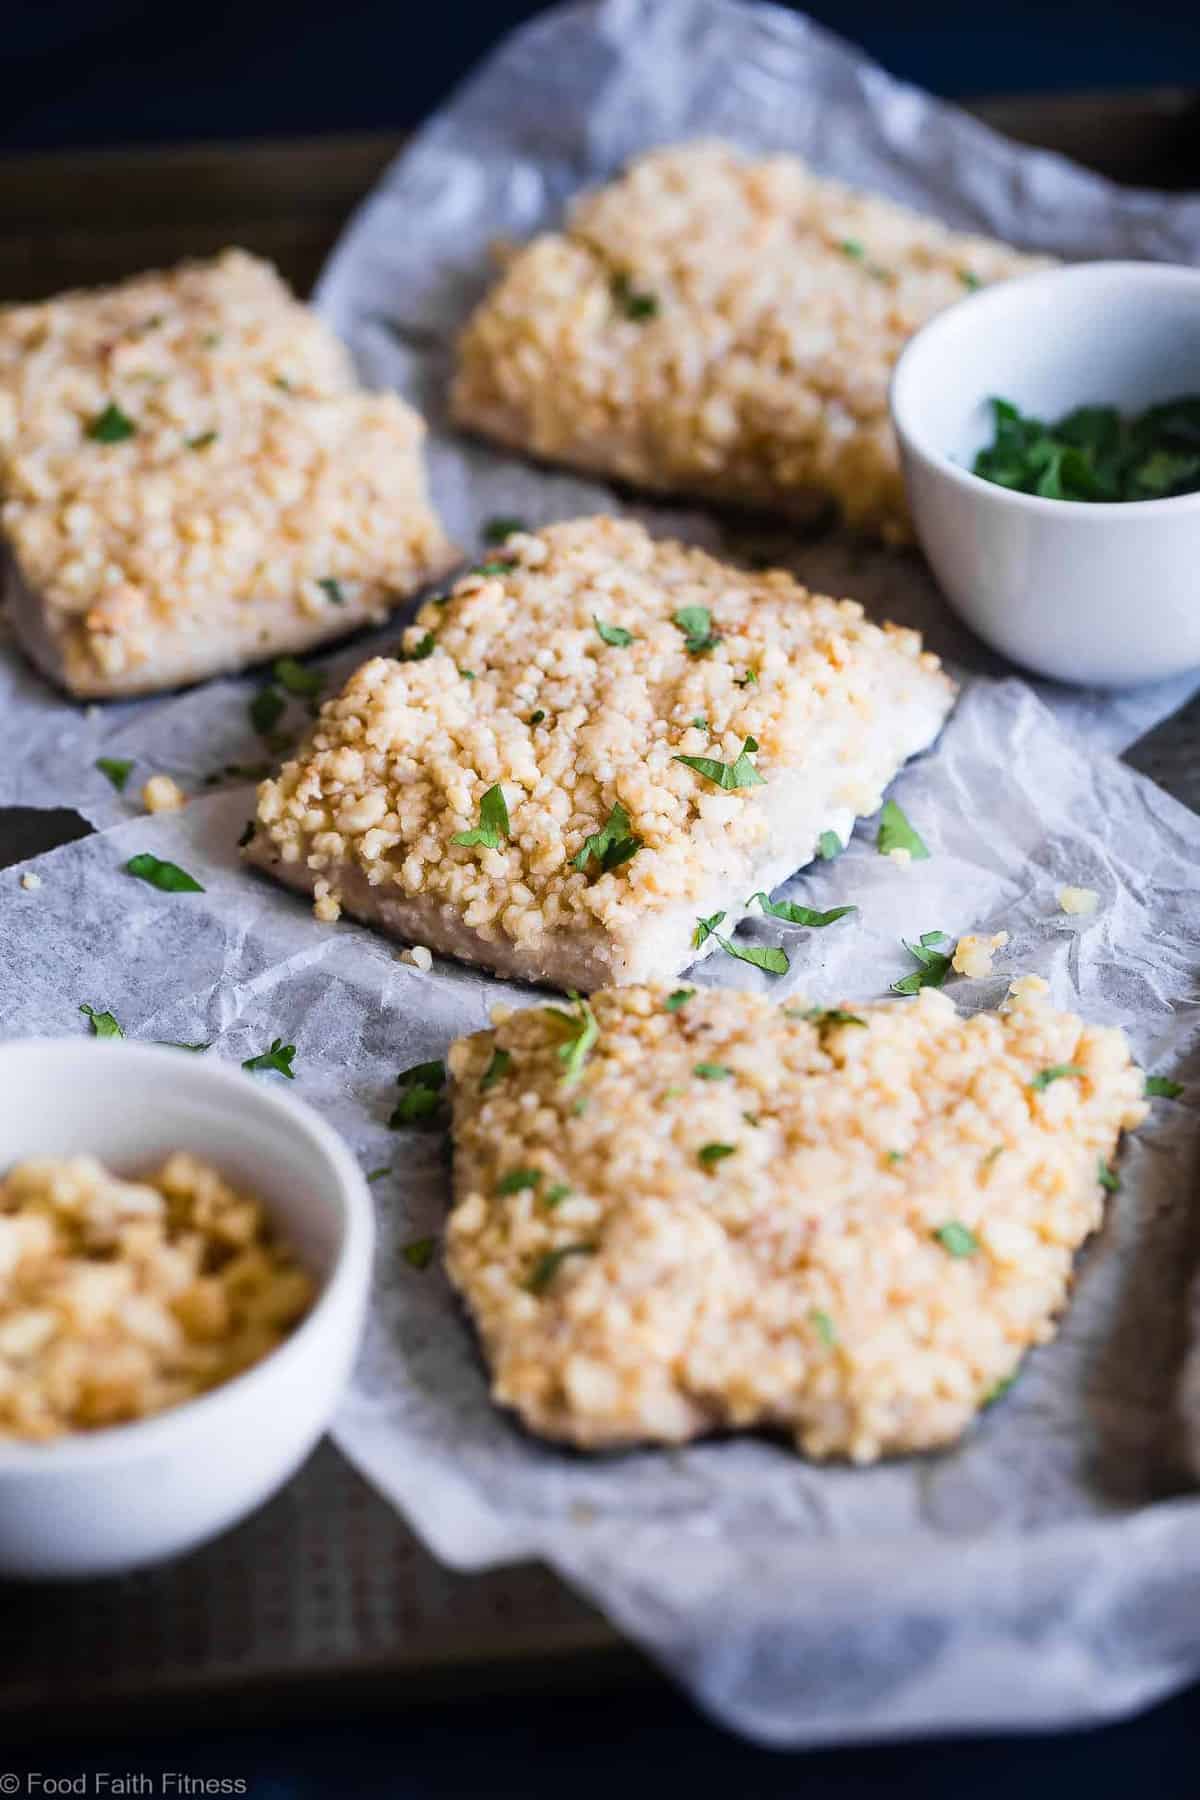 Oven Baked Mahi Mahi with Macadamia Crust - This oven baked mahi mahi is a quick and easy healthy dish with only 3 ingredients! Keto, Whole30 and paleo friendly and SO tasty! You definitely want this recipe in your back pocket for busy weeknights! | #Foodfaithfitness | #Whole30 #Paleo #Healthy #Glutenfree #Keto